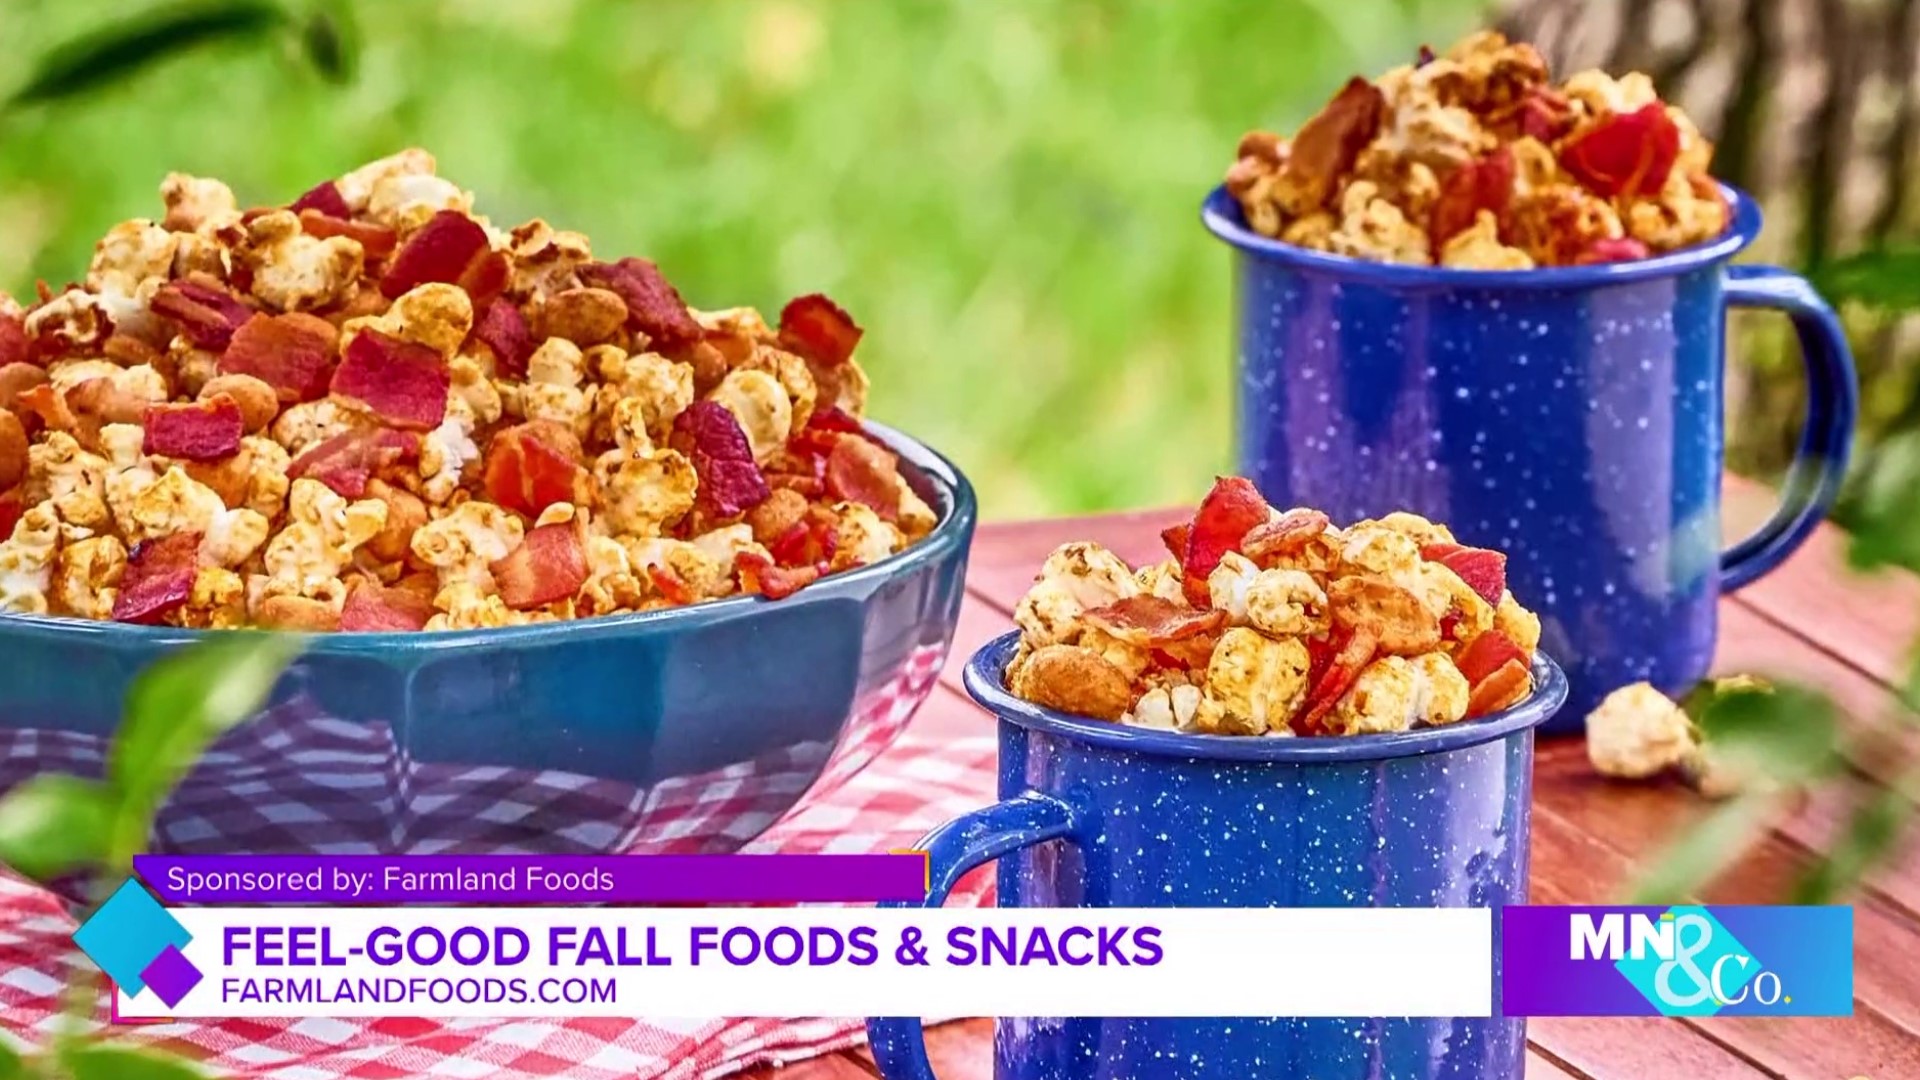 Farmland Foods joins Minnesota and Company to discuss their new seasonal Fall foods, from Maple Bacon Kettle Corn to Mom-Approved Mini Cans.